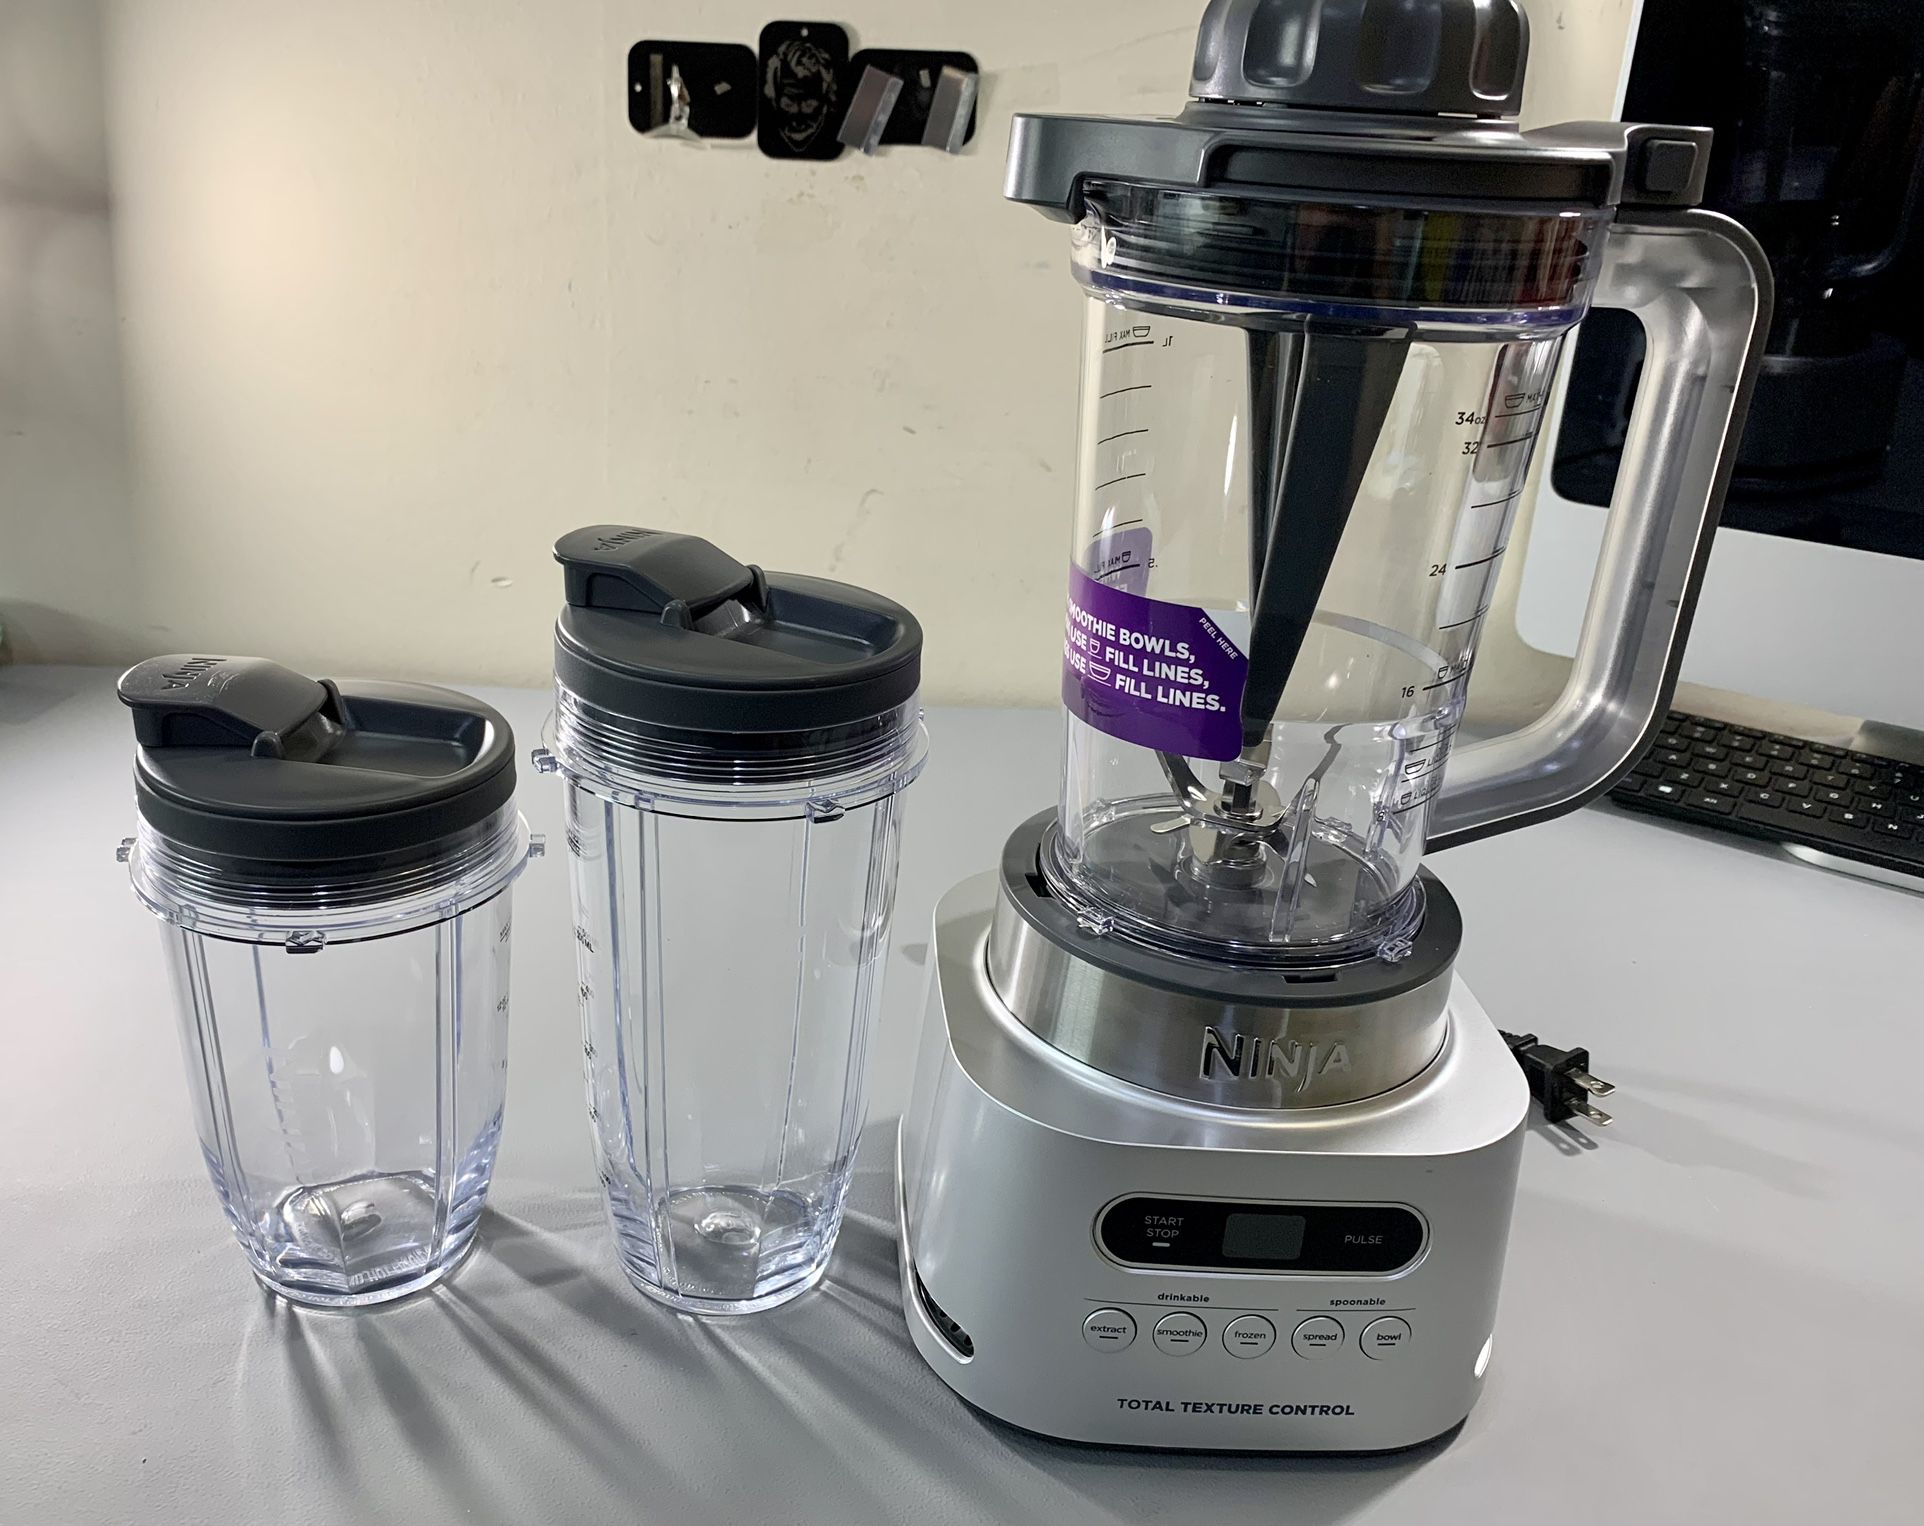 Ninja SS151 TWISTi Blender DUO, High Speed ​​1600 WP Blender and Nutrient  Extractor for Sale in Miami, FL - OfferUp